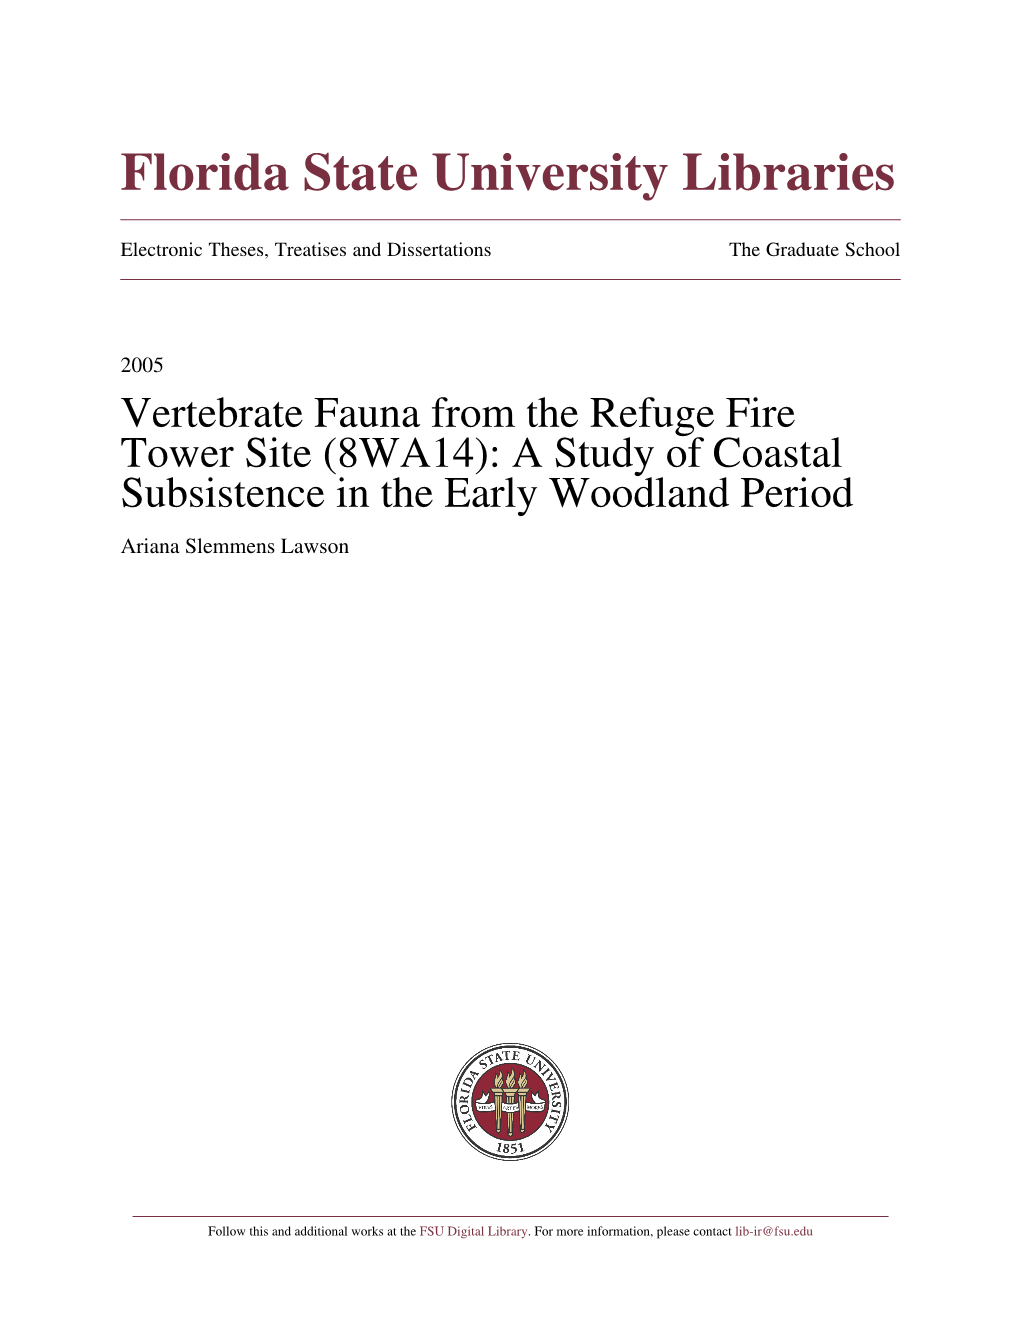 Vertebrate Fauna from the Refuge Fire Tower Site (8WA14): a Study of Coastal Subsistence in the Early Woodland Period Ariana Slemmens Lawson